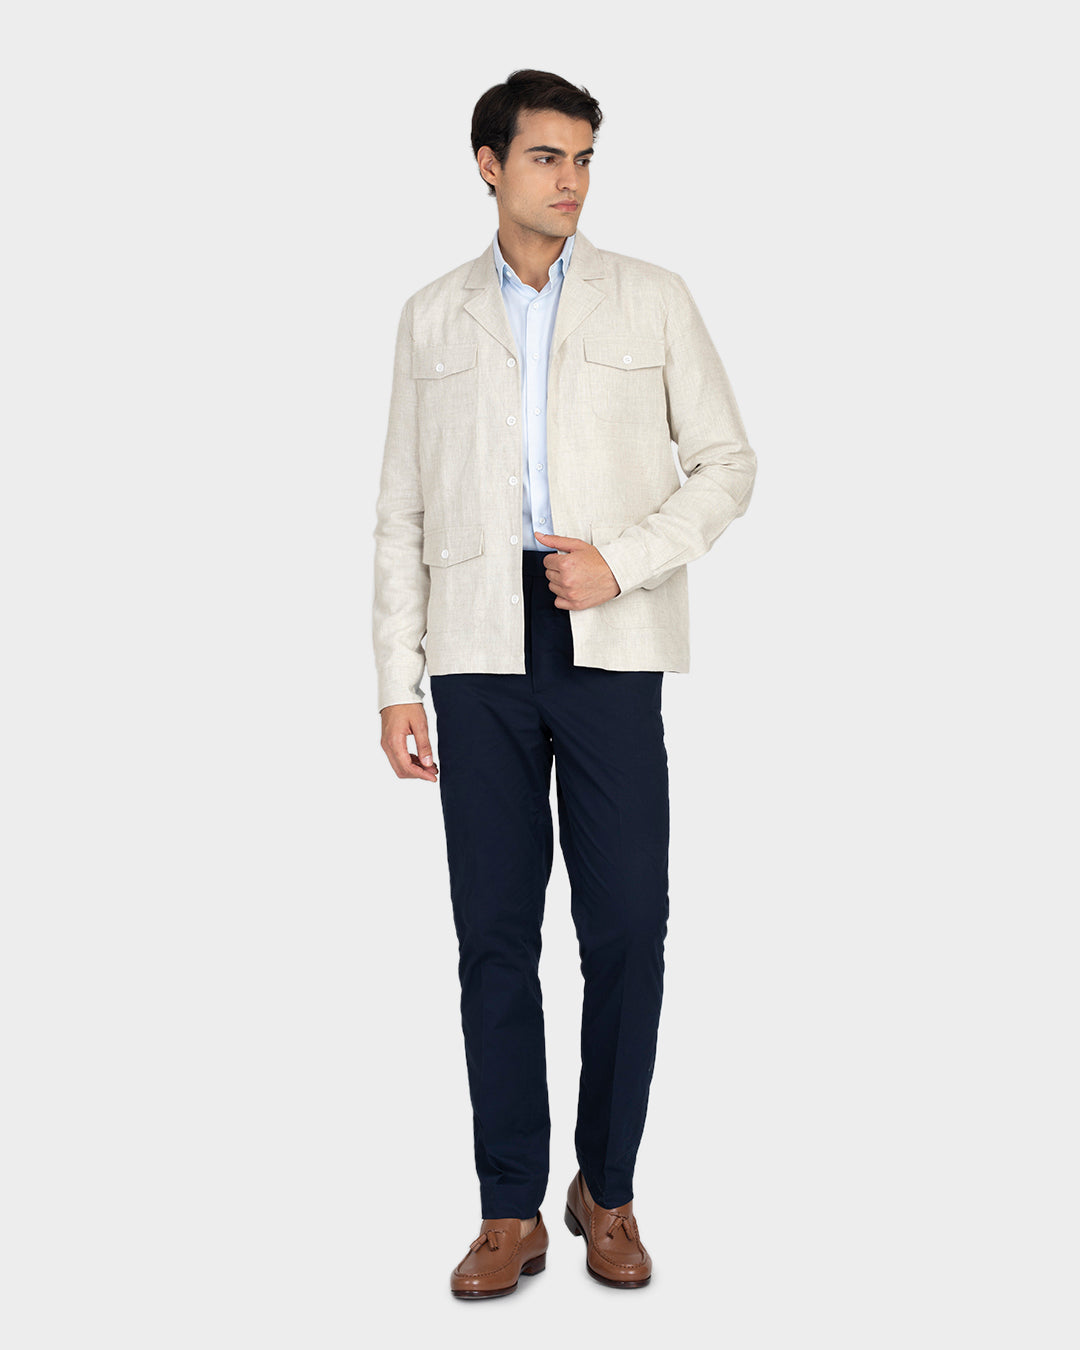 Front of model wearing the muslin shirt jacket for men by Luxire